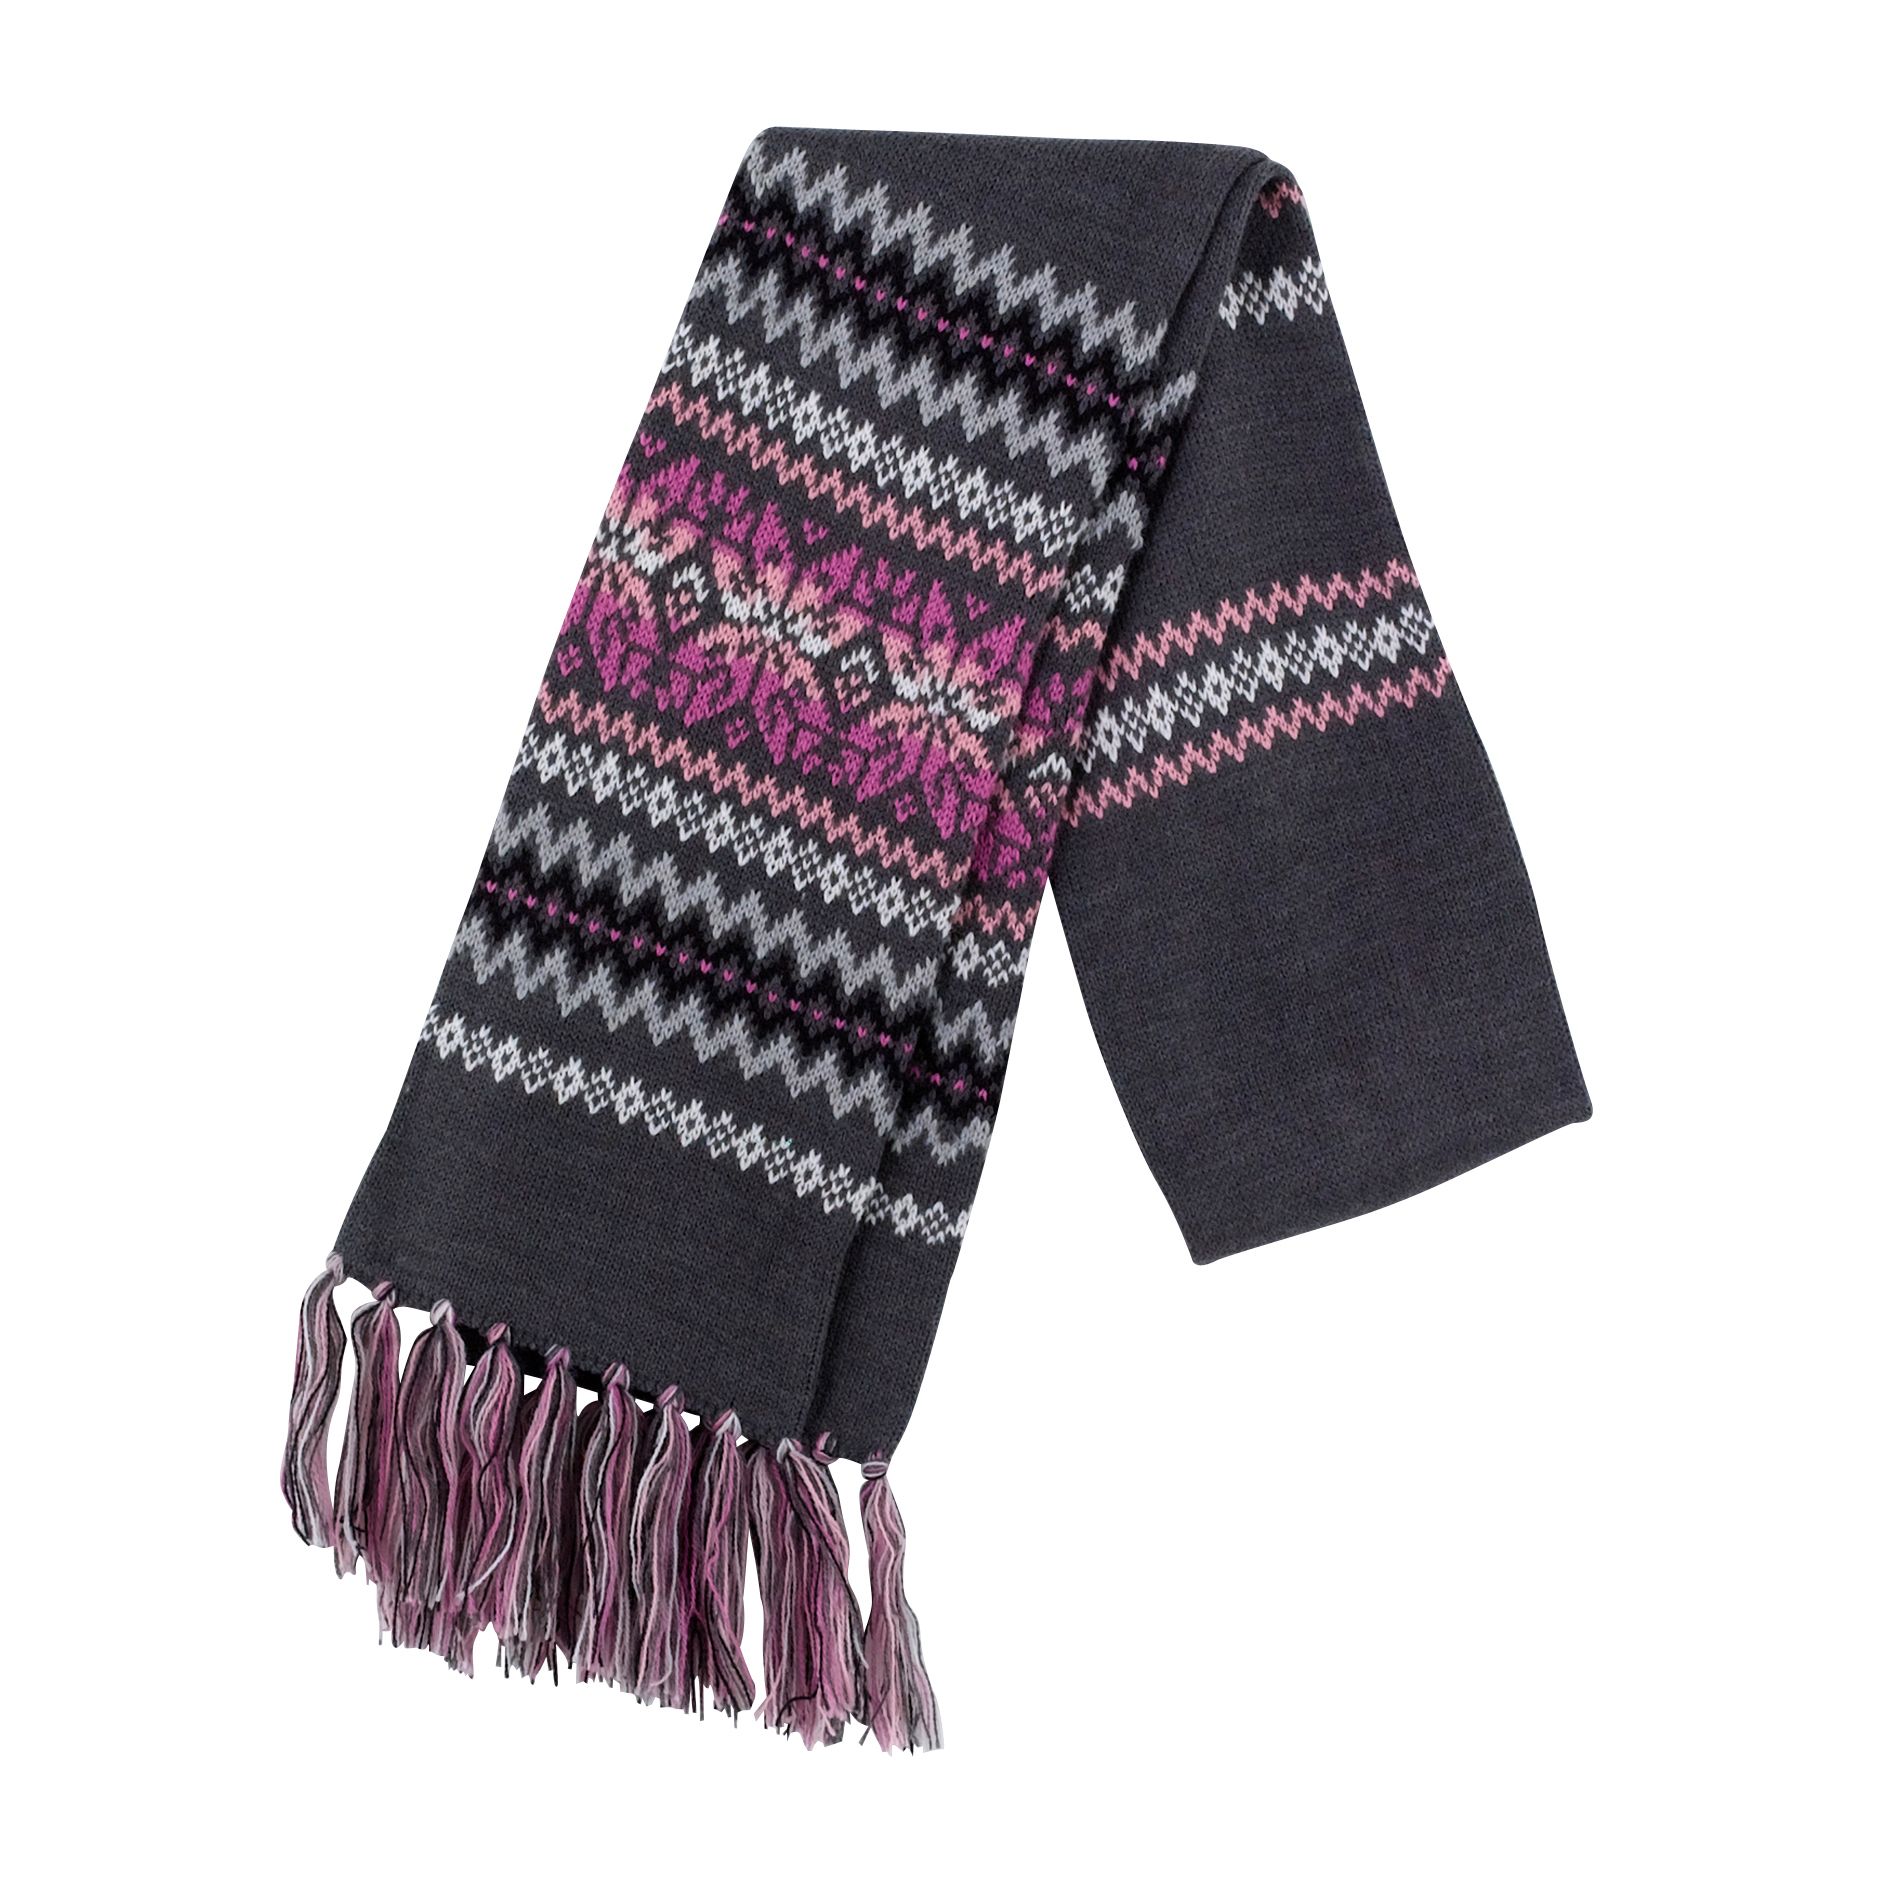 Accessories LDS Snowflake Scarf